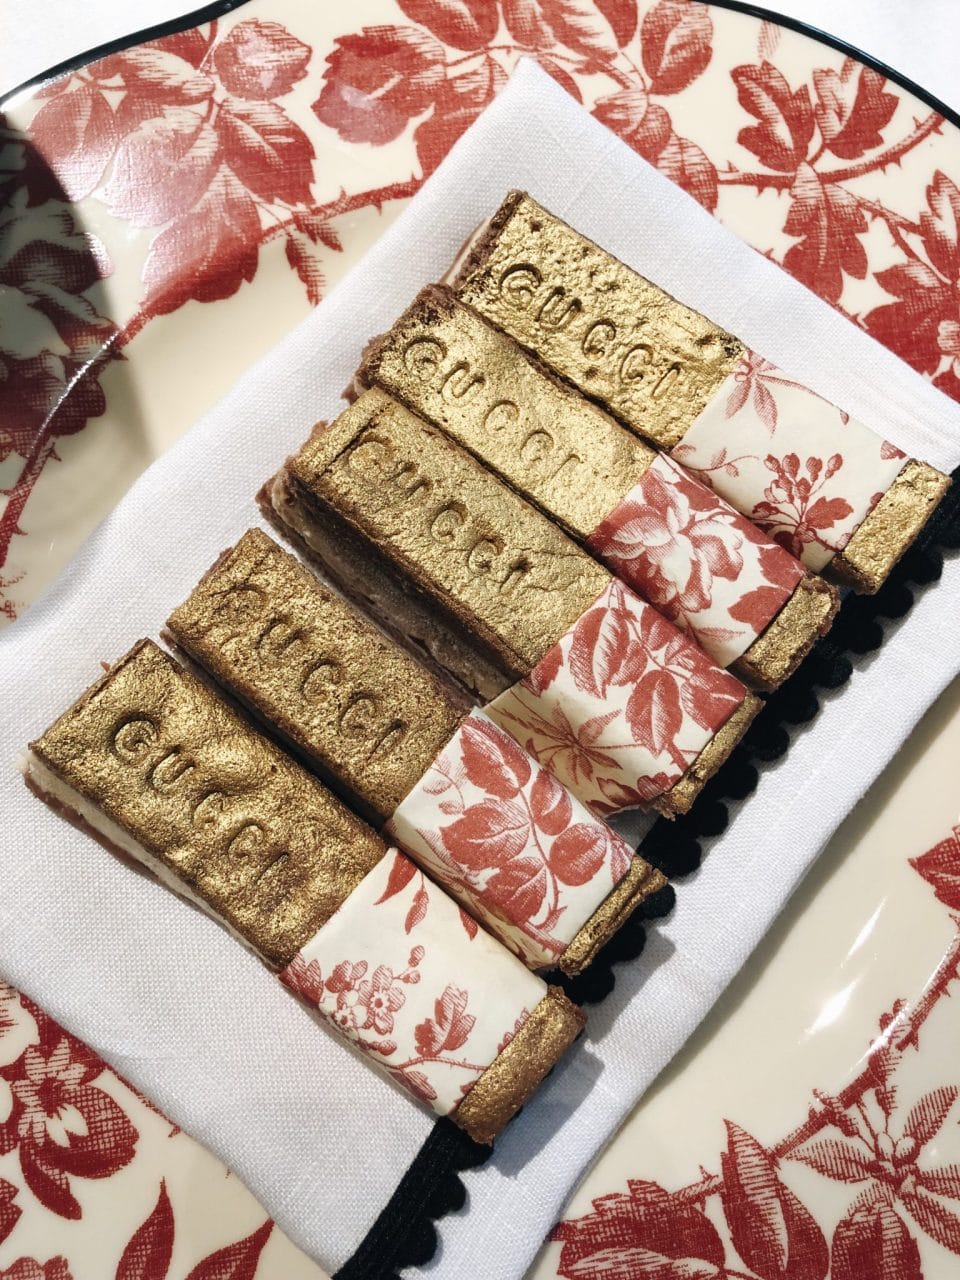 A taste of luxury: Chew Gucci, sip Louis Vuitton, and bite into